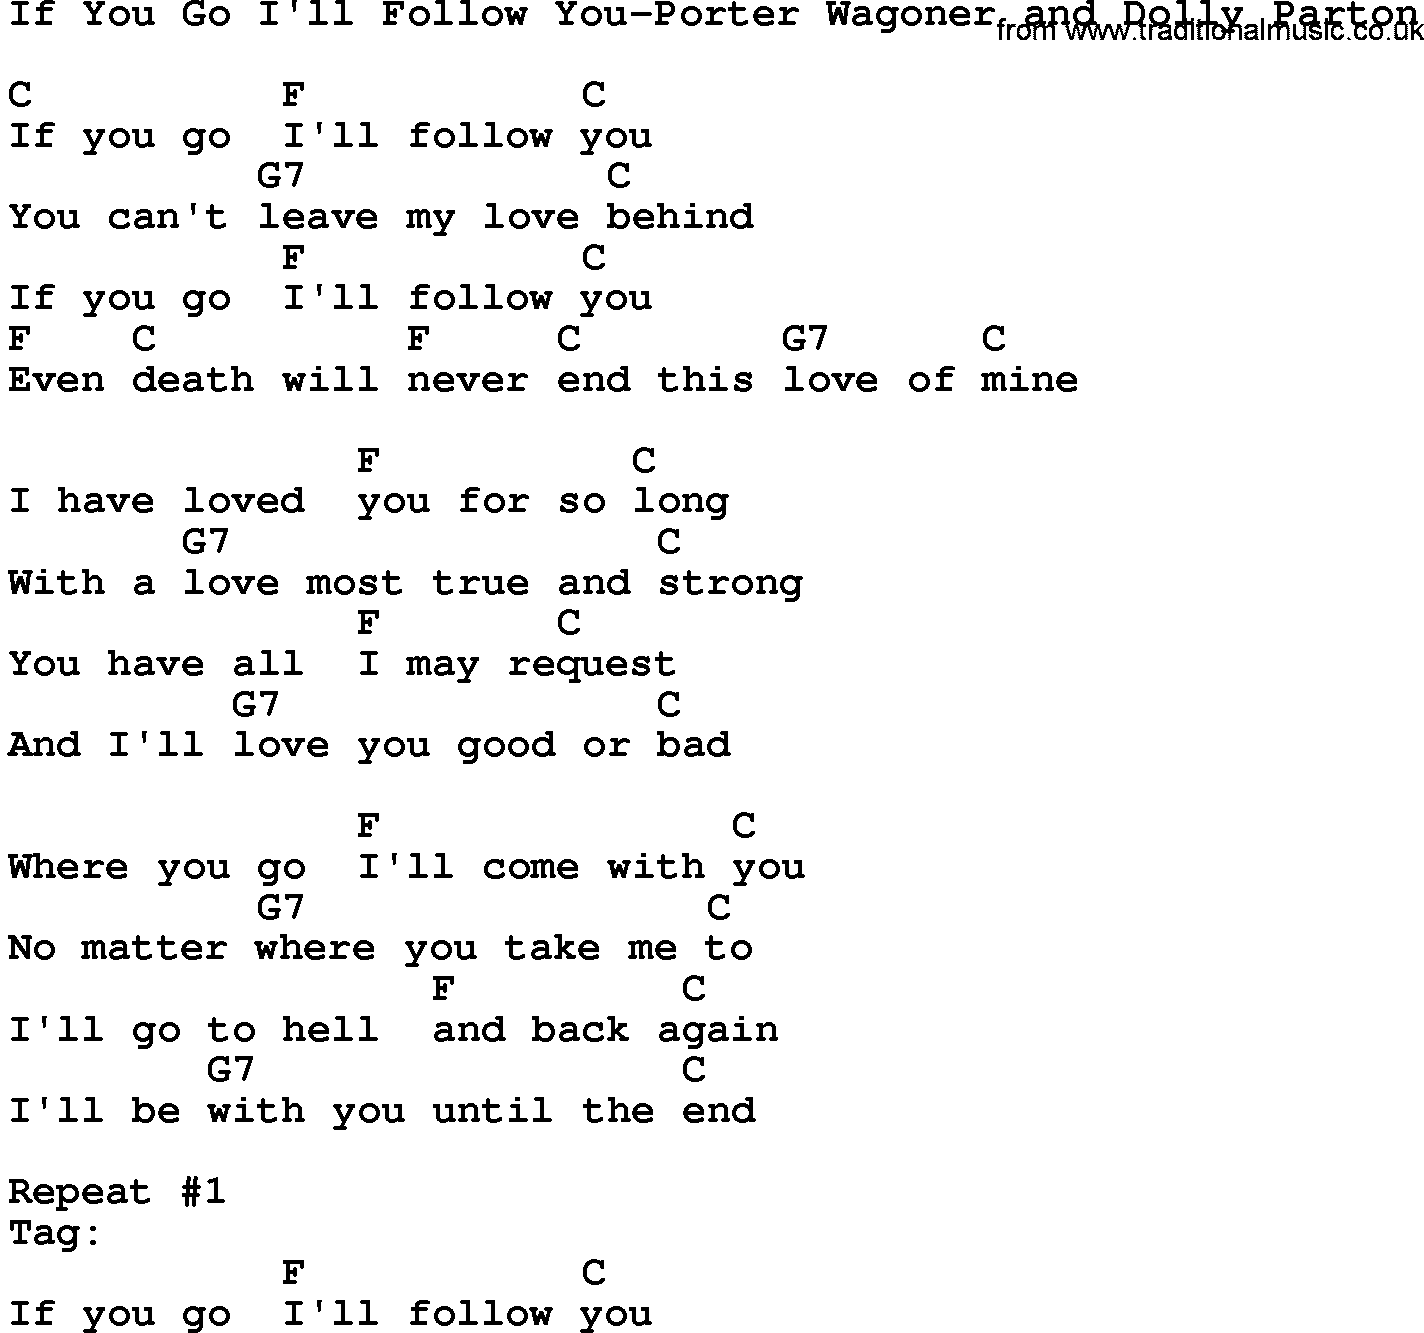 Country music song: If You Go I'll Follow You-Porter Wagoner And Dolly Parton lyrics and chords